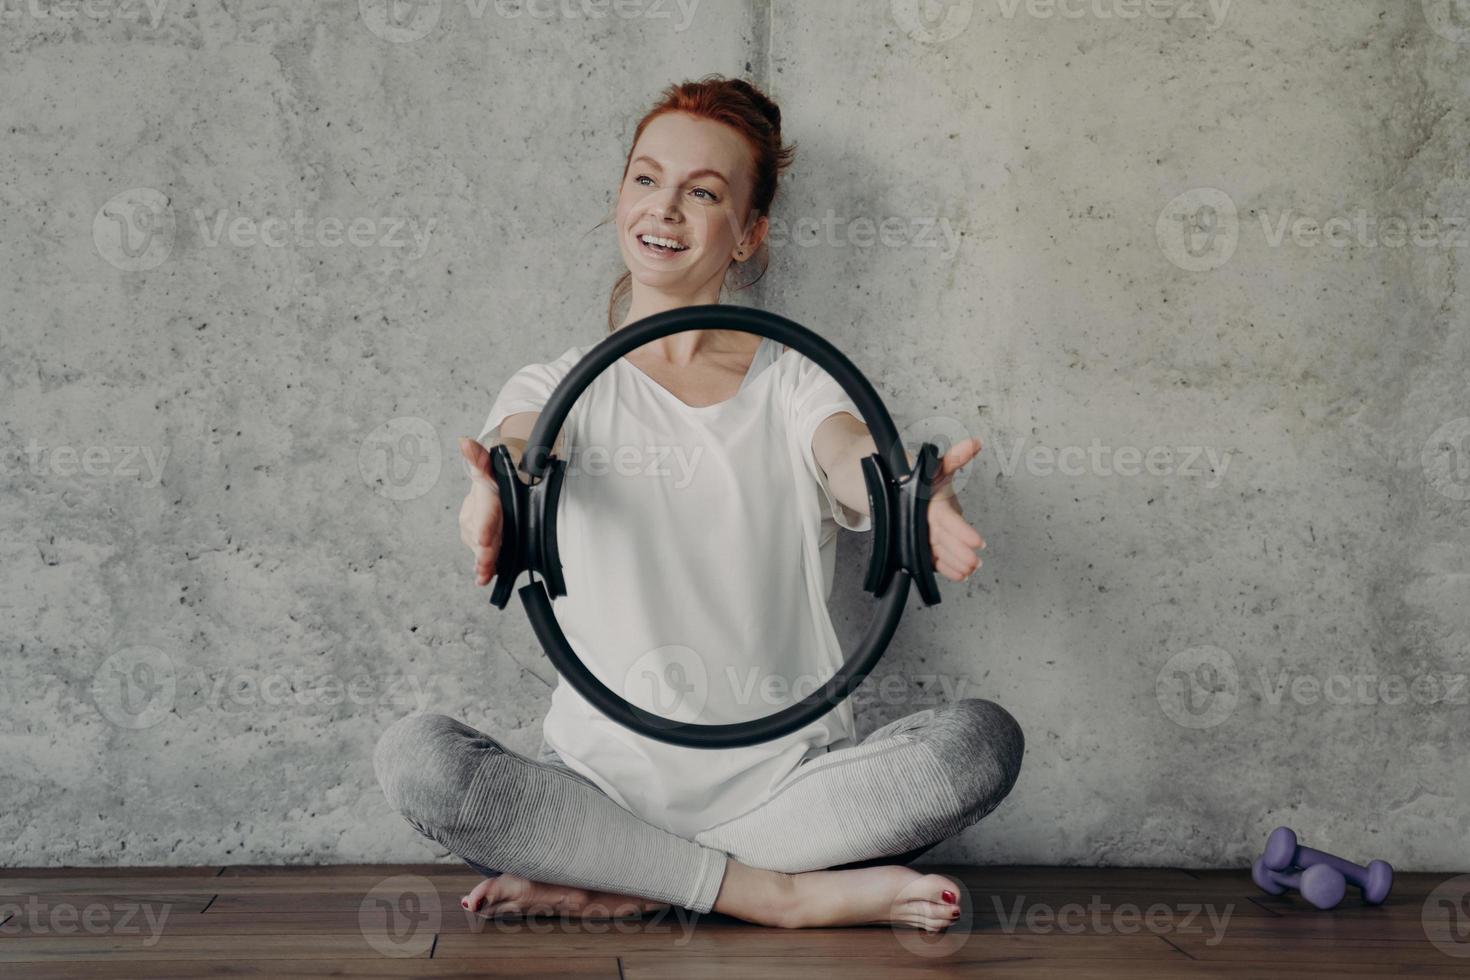 Happy smiling redhead woman sitting in lotus pose with pilates ring during workout photo